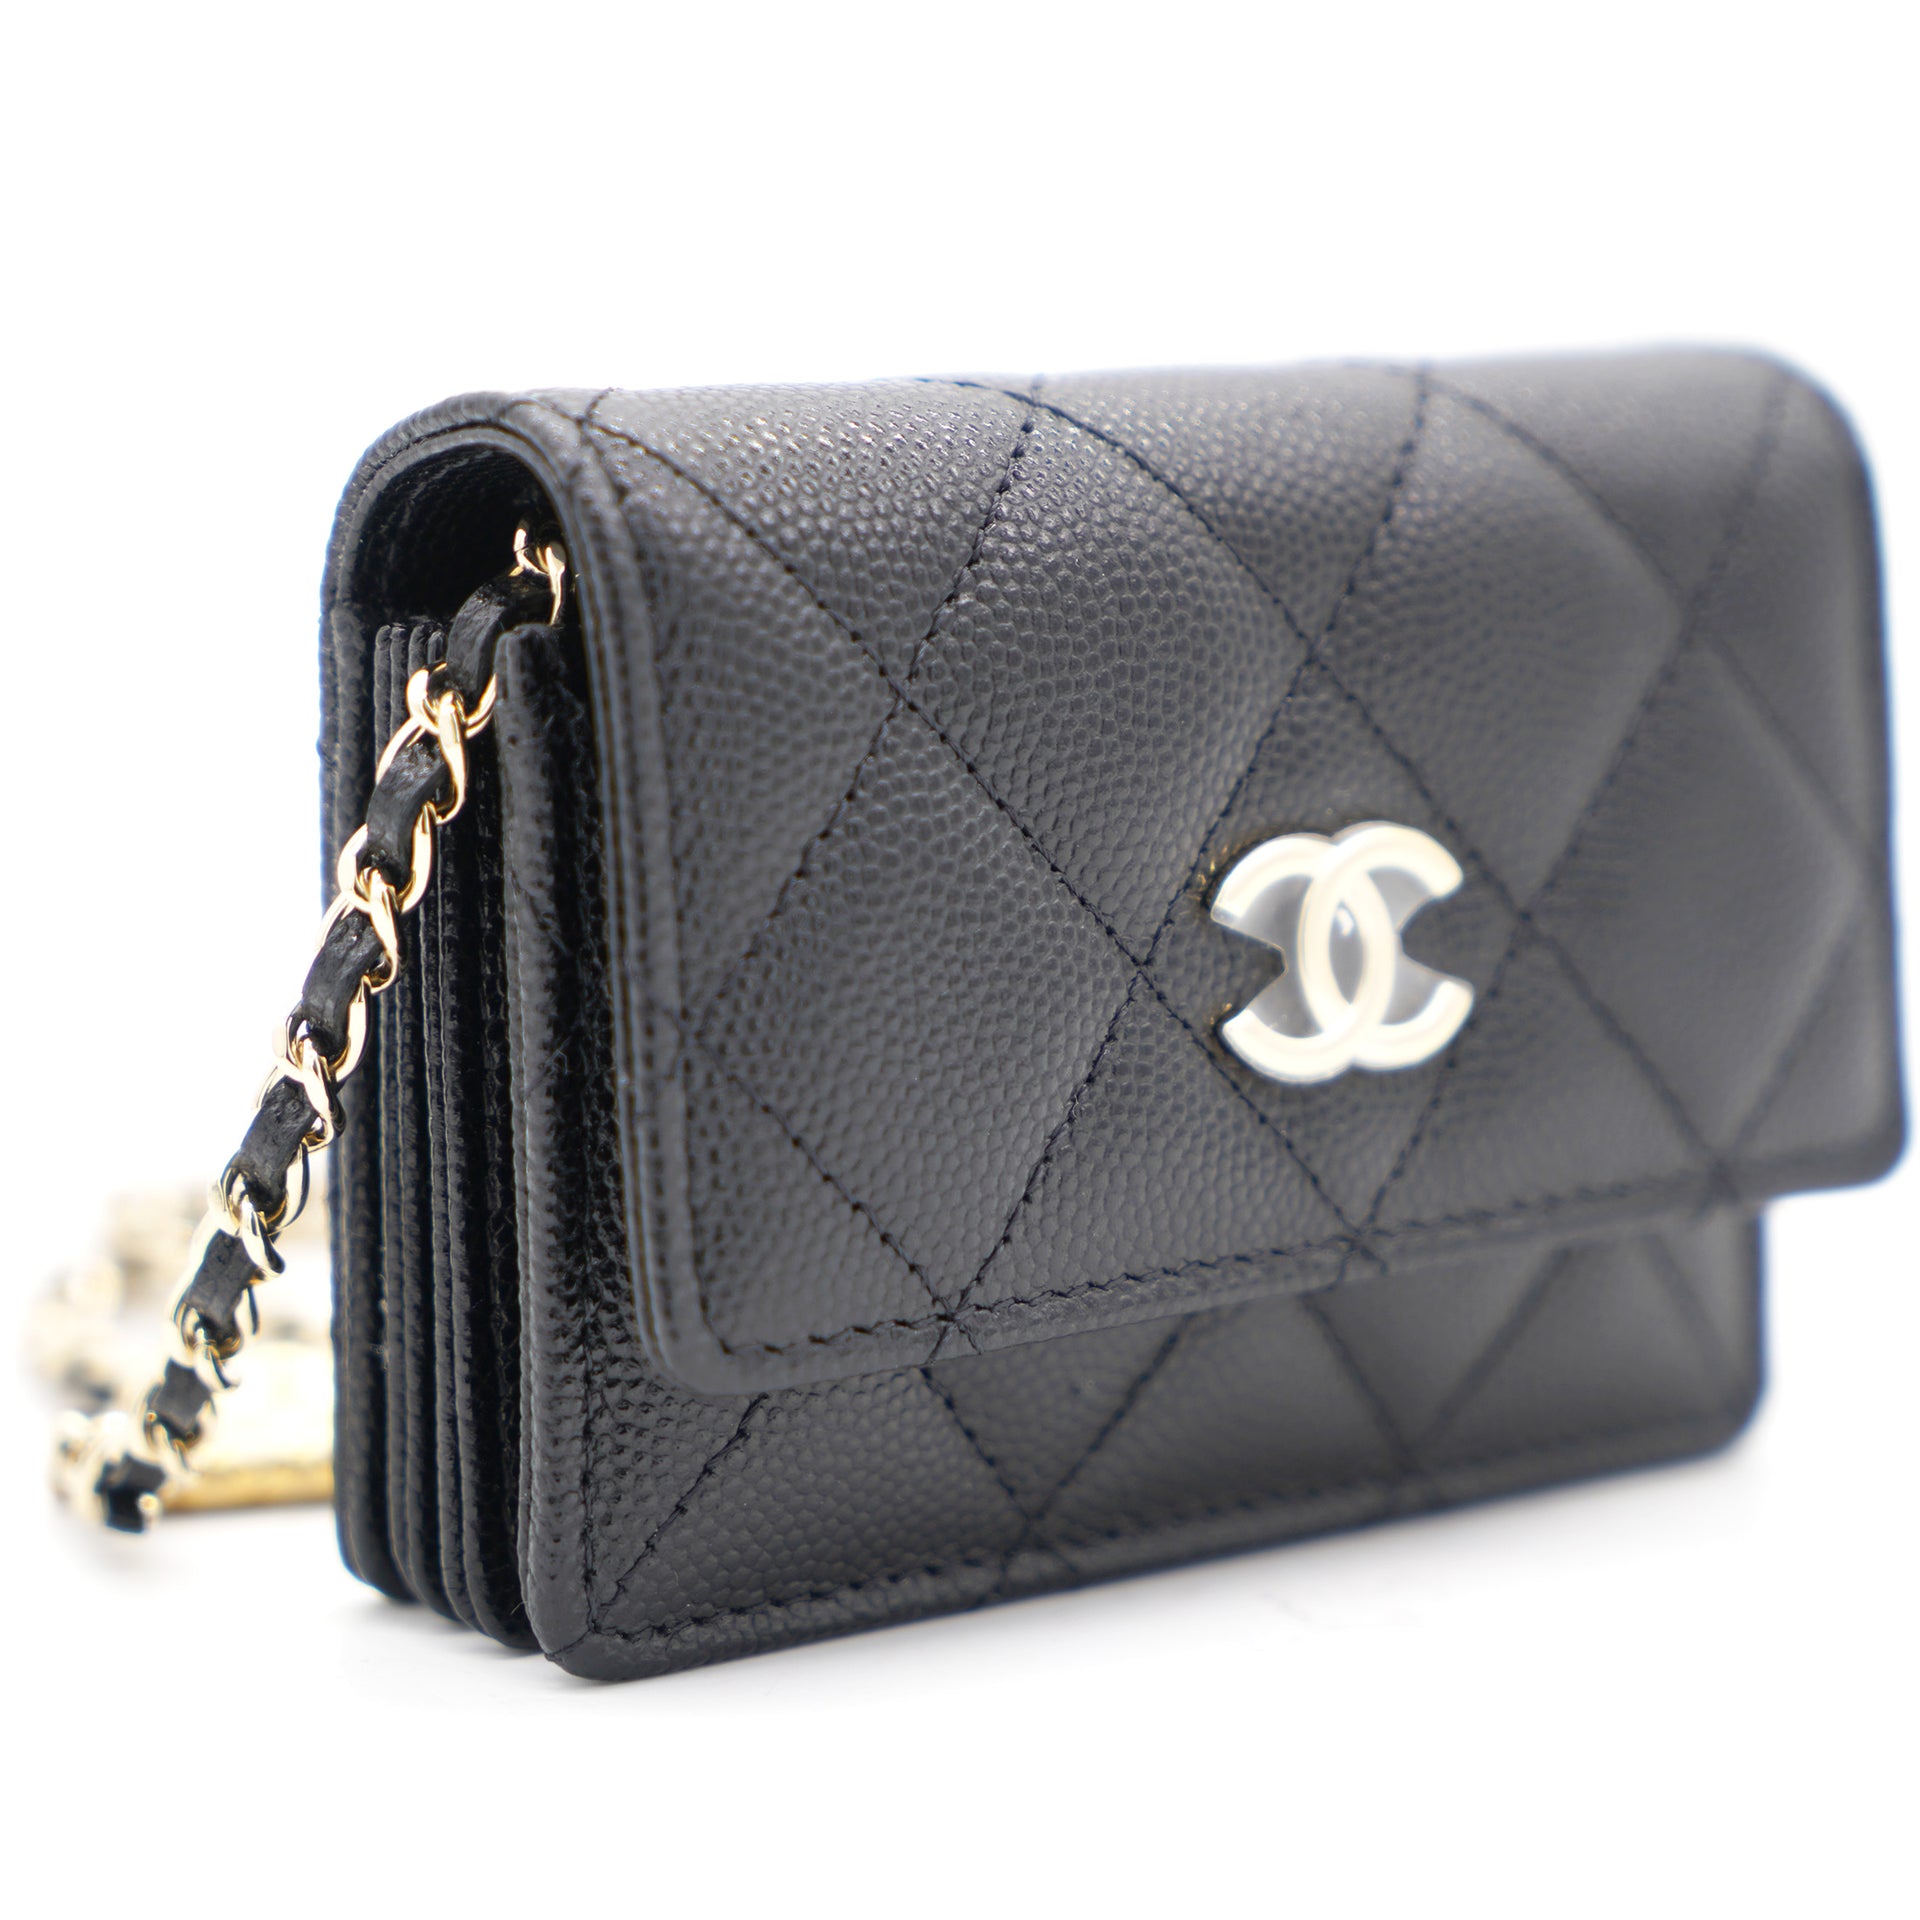 Chanel Black Quilted Caviar Leather Flap Card Holder with Charm